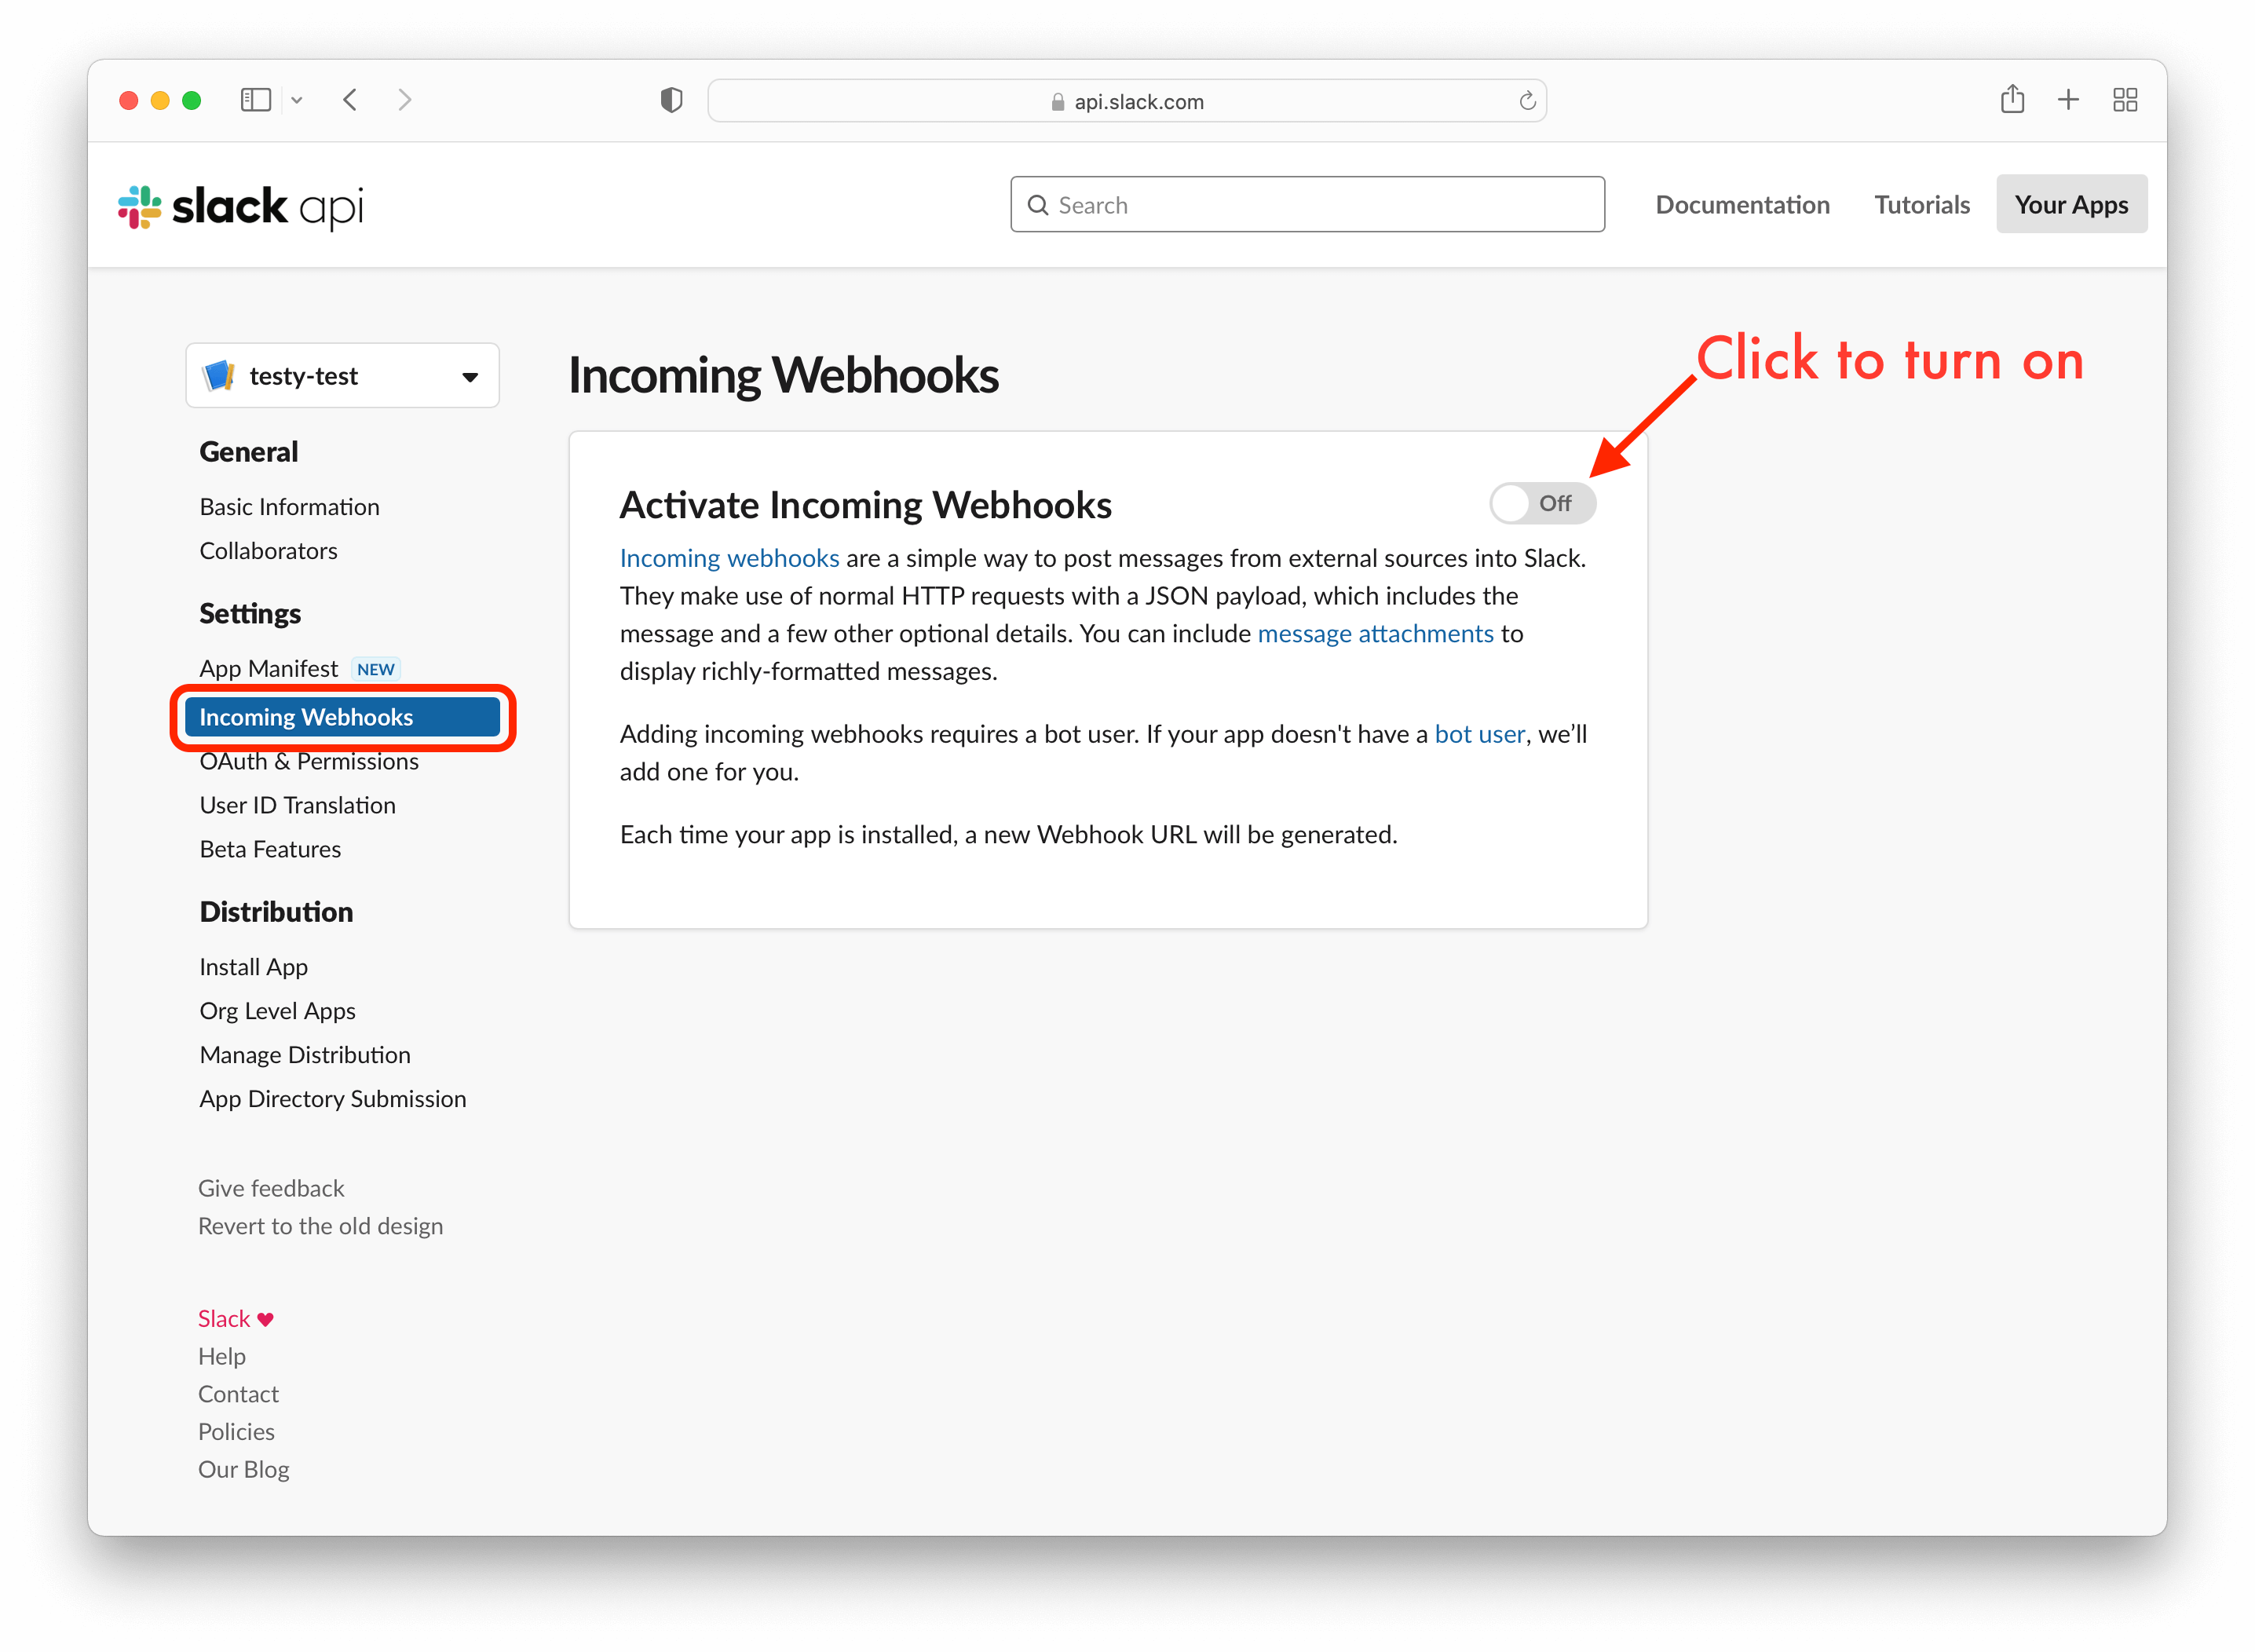 Slack Activate Incoming Webhooks page